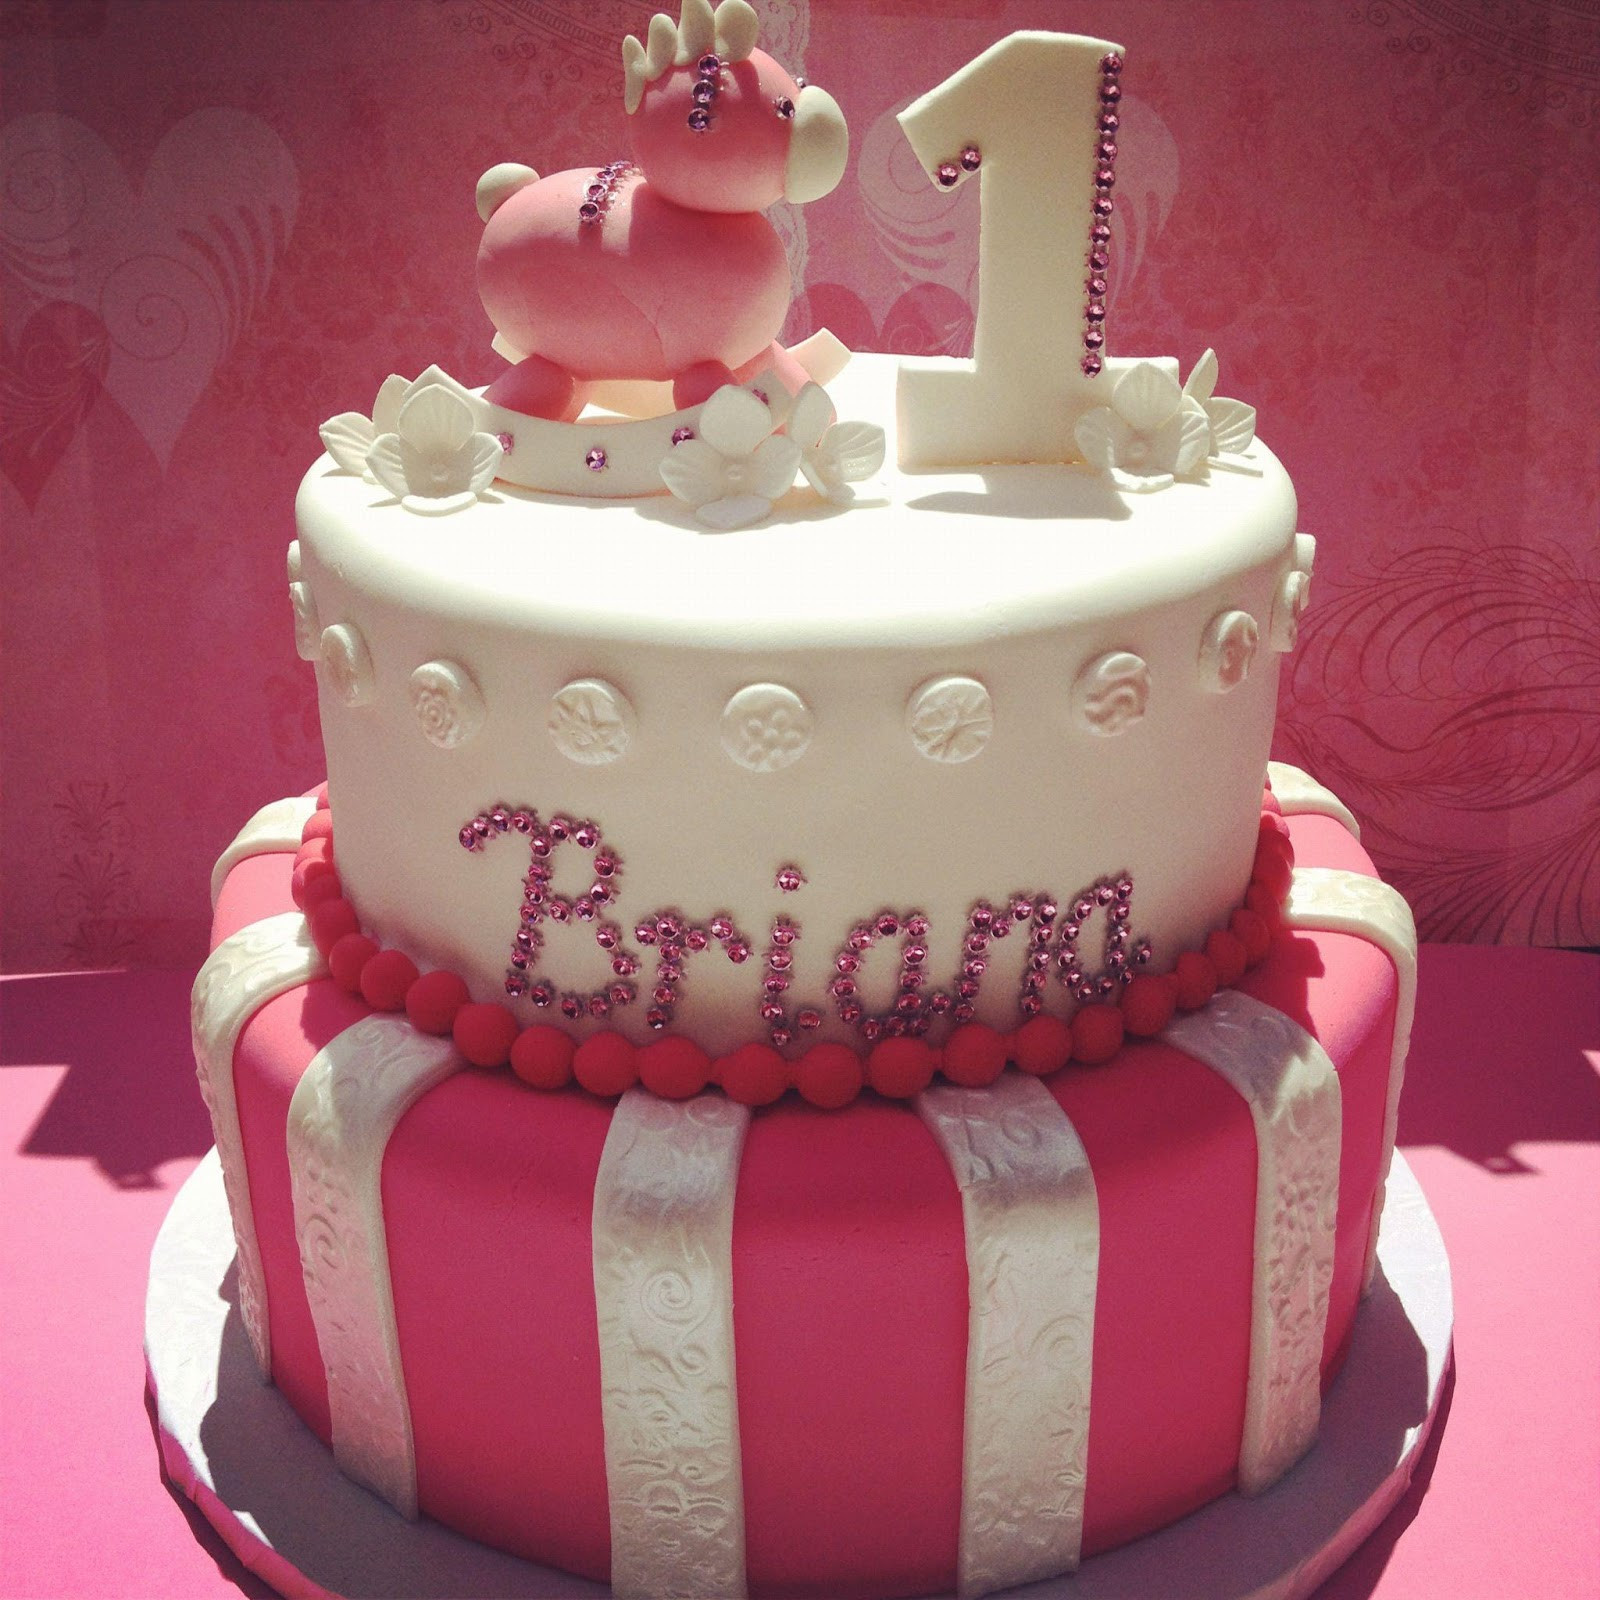 One Year Old Birthday Cake
 The Frosted Cake Boutique 1st Birthday Cake